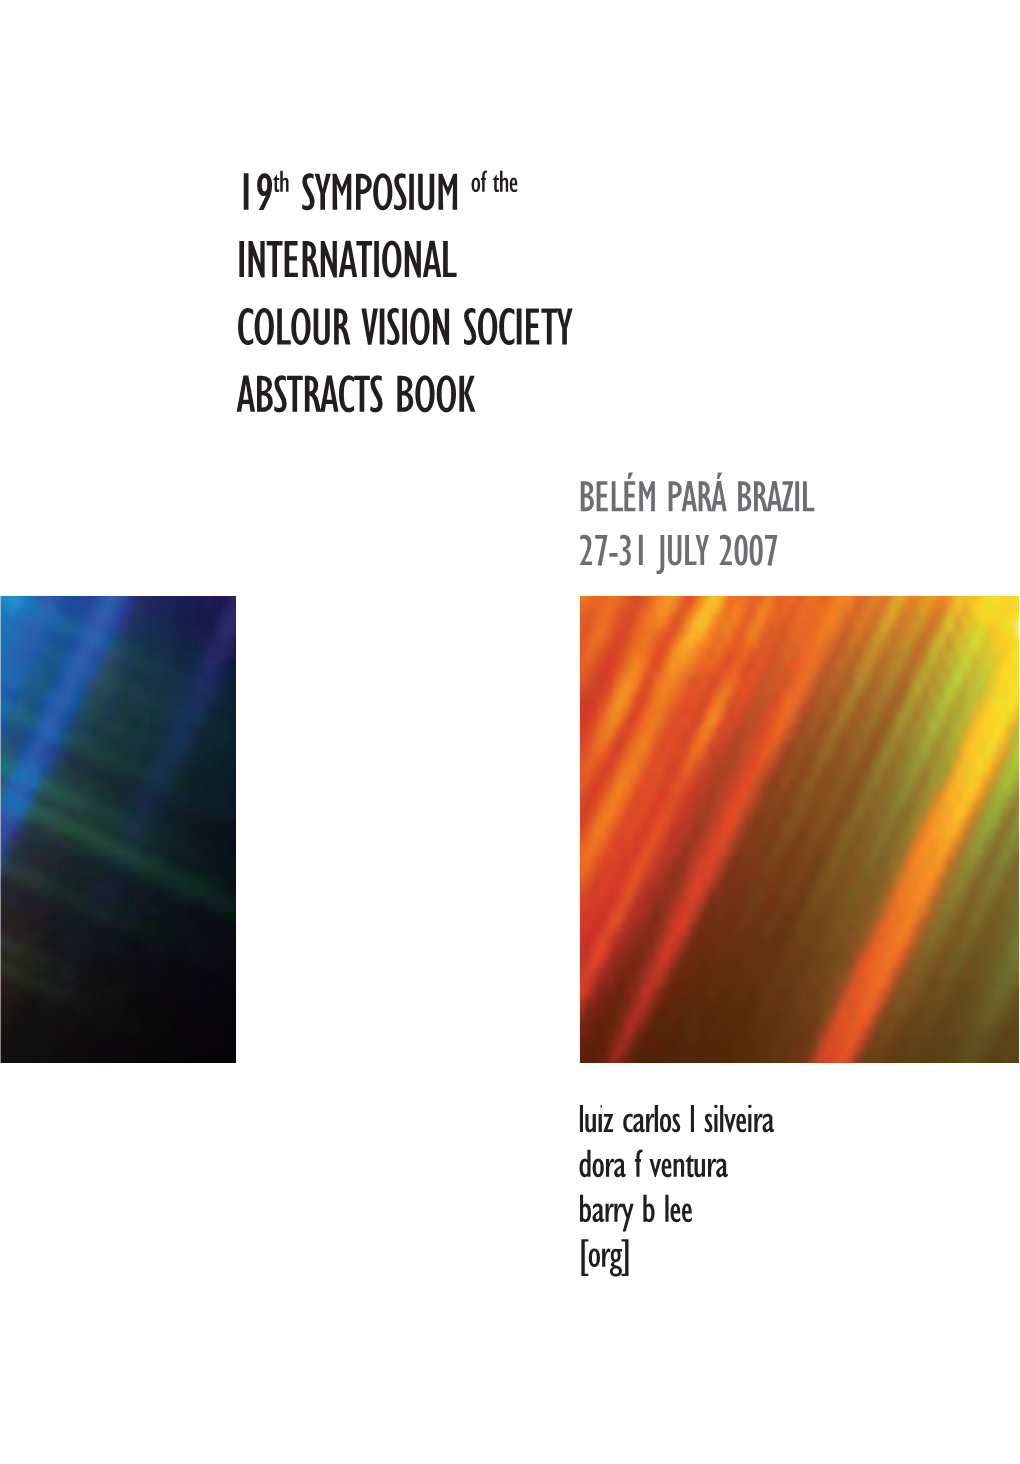 19Th SYMPOSIUM of the INTERNATIONAL COLOUR VISION SOCIETY ABSTRACTS BOOK